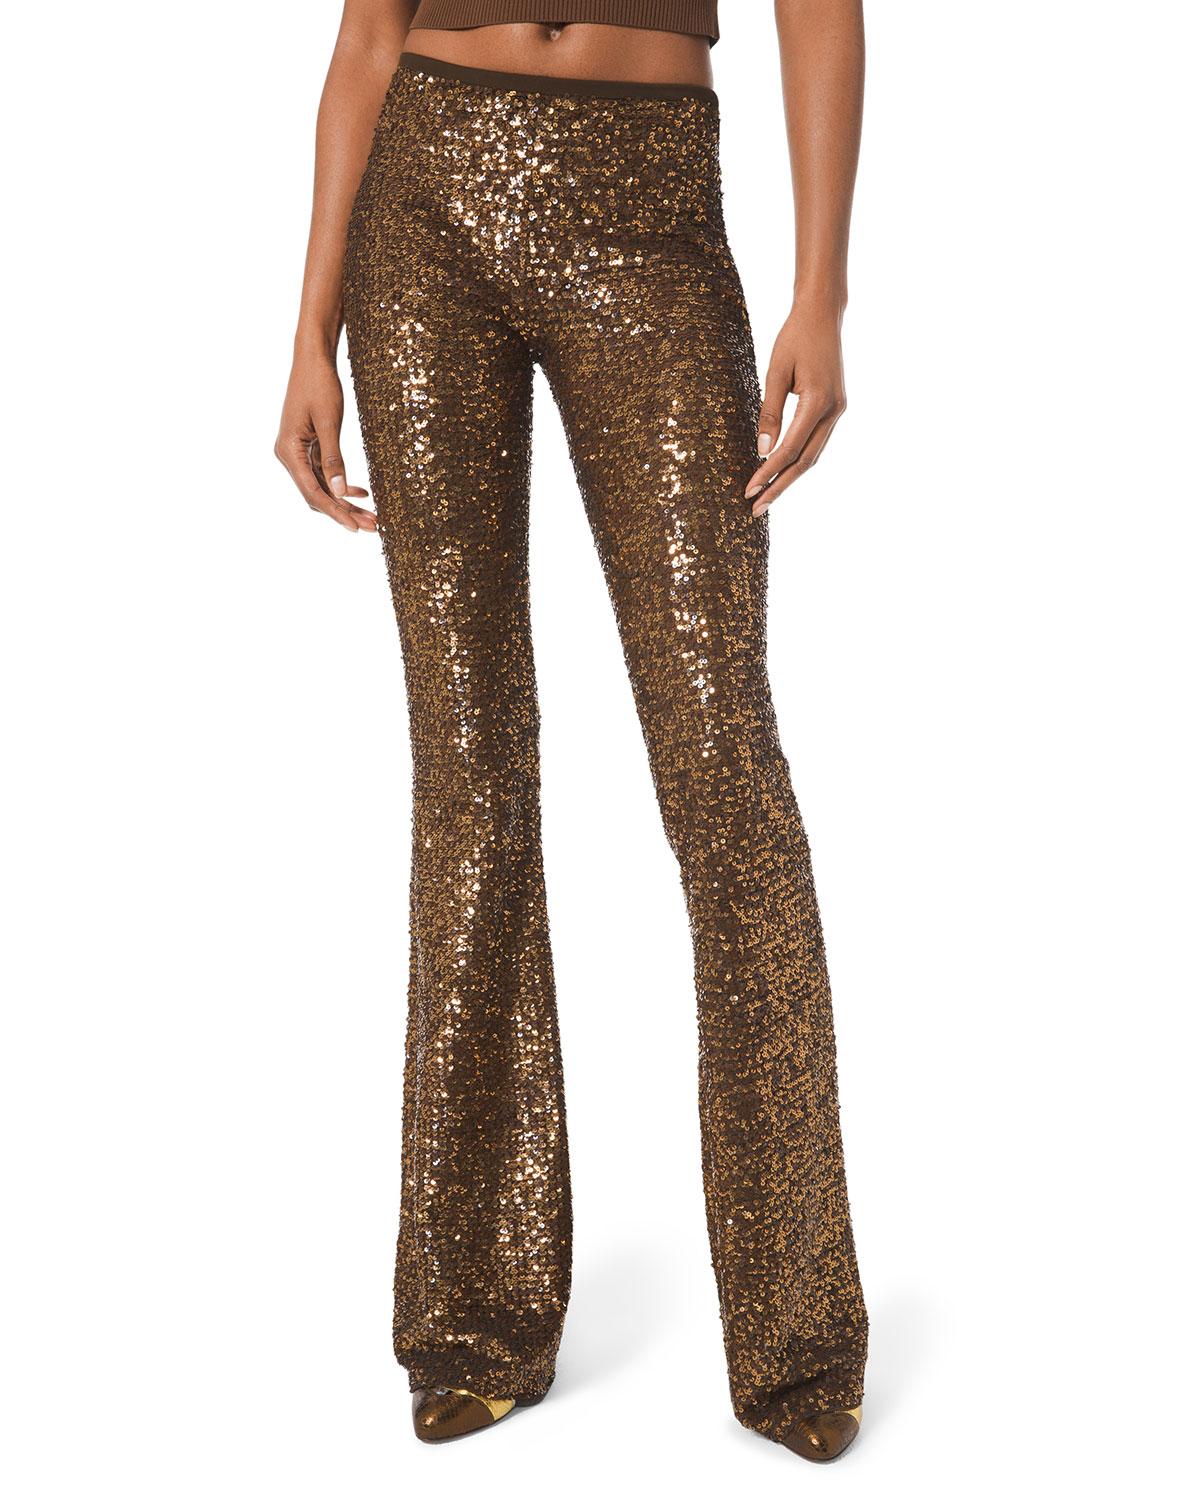 Michael Kors Sequined Flare-leg Pants in Brown - Lyst